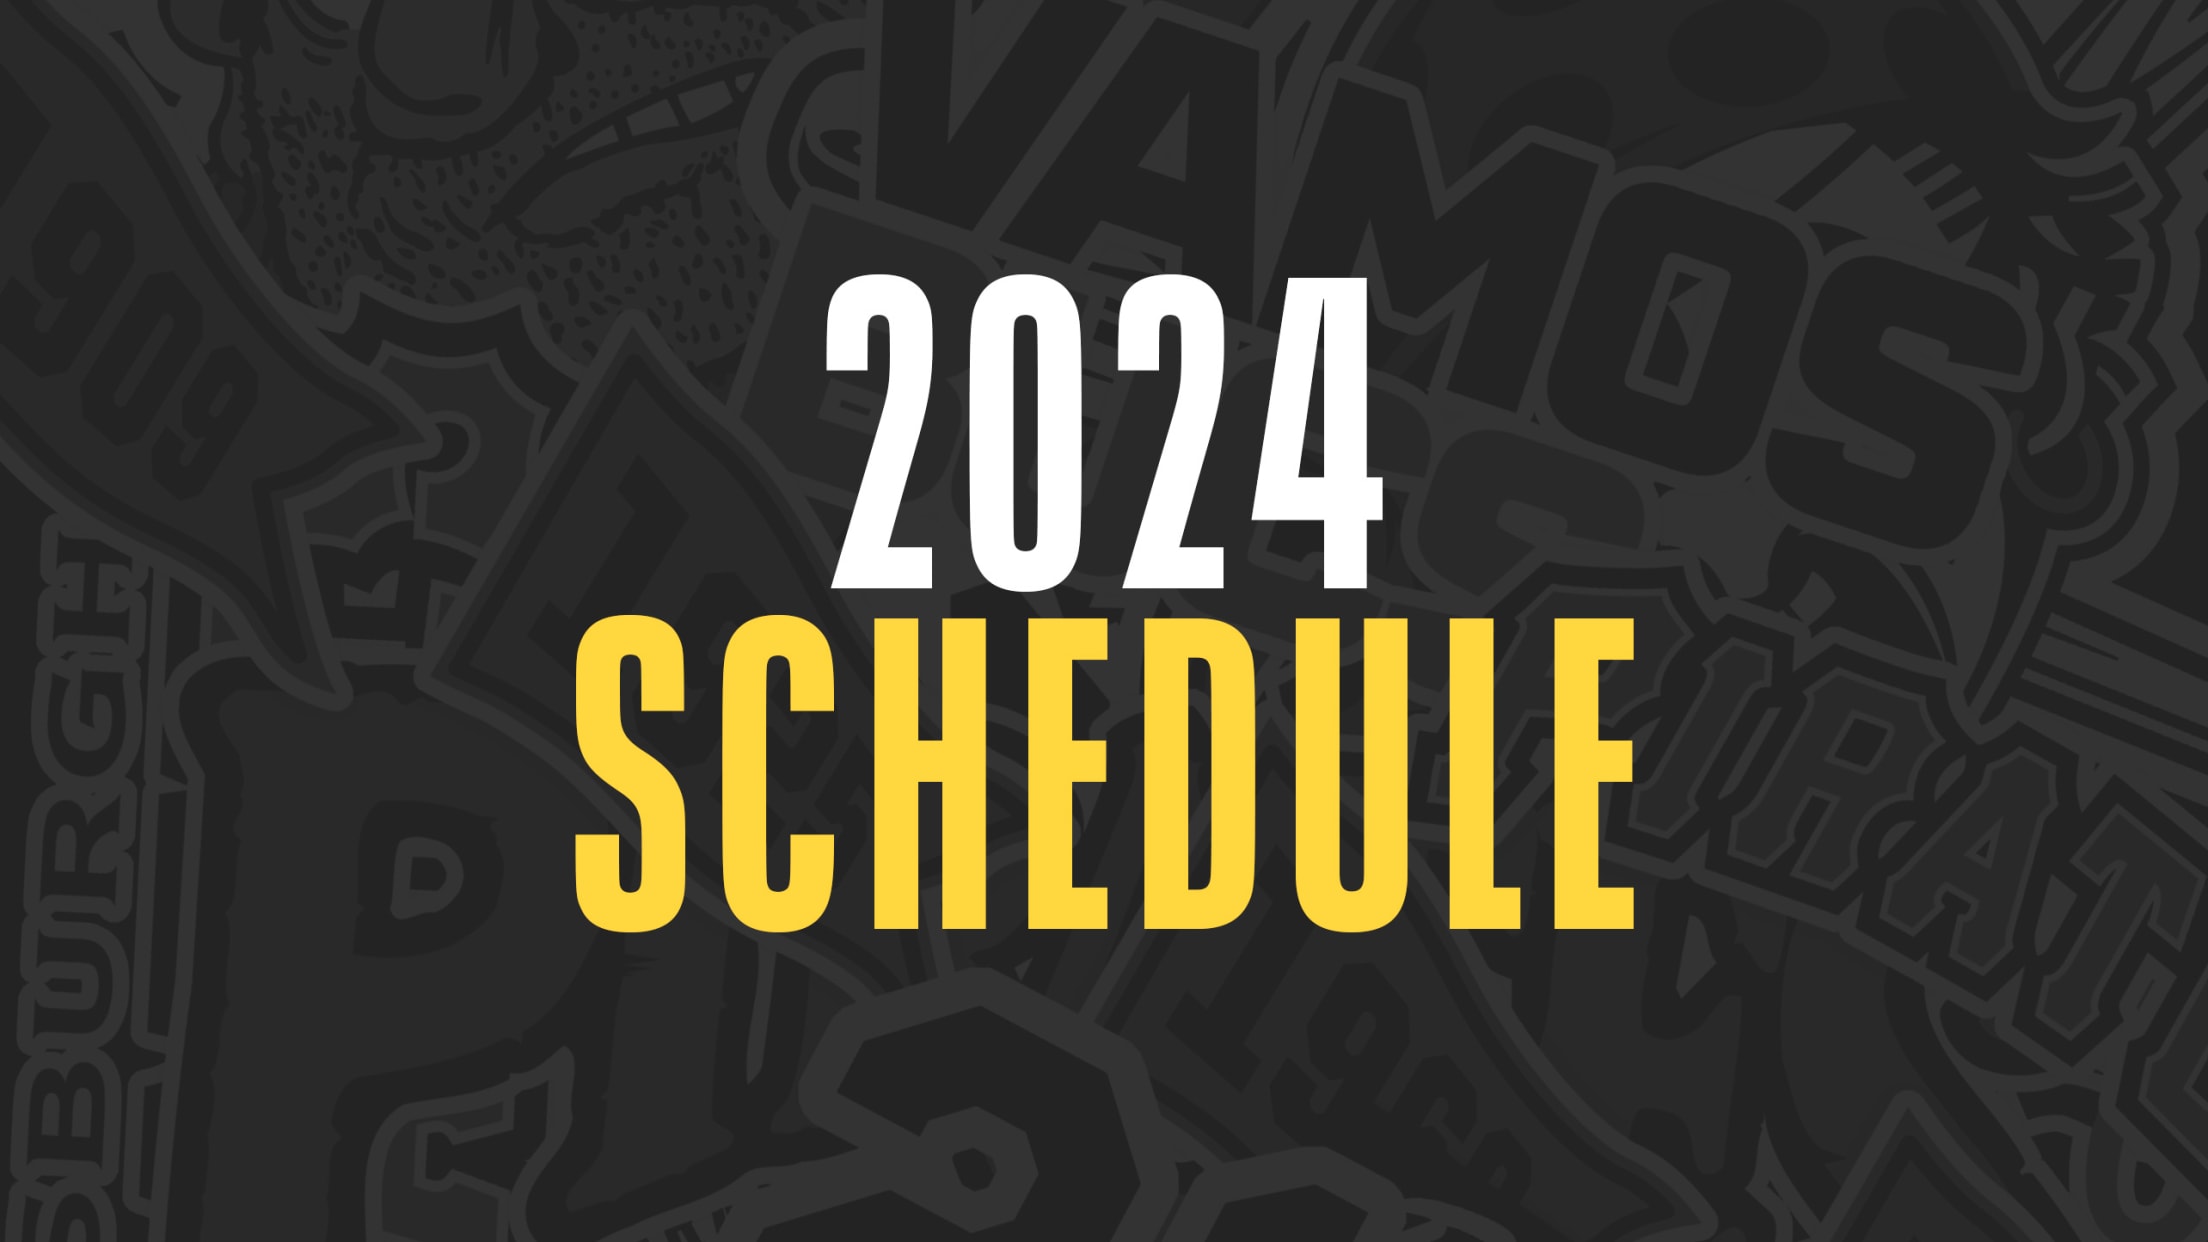 Tigers announce 2018 promotions schedule